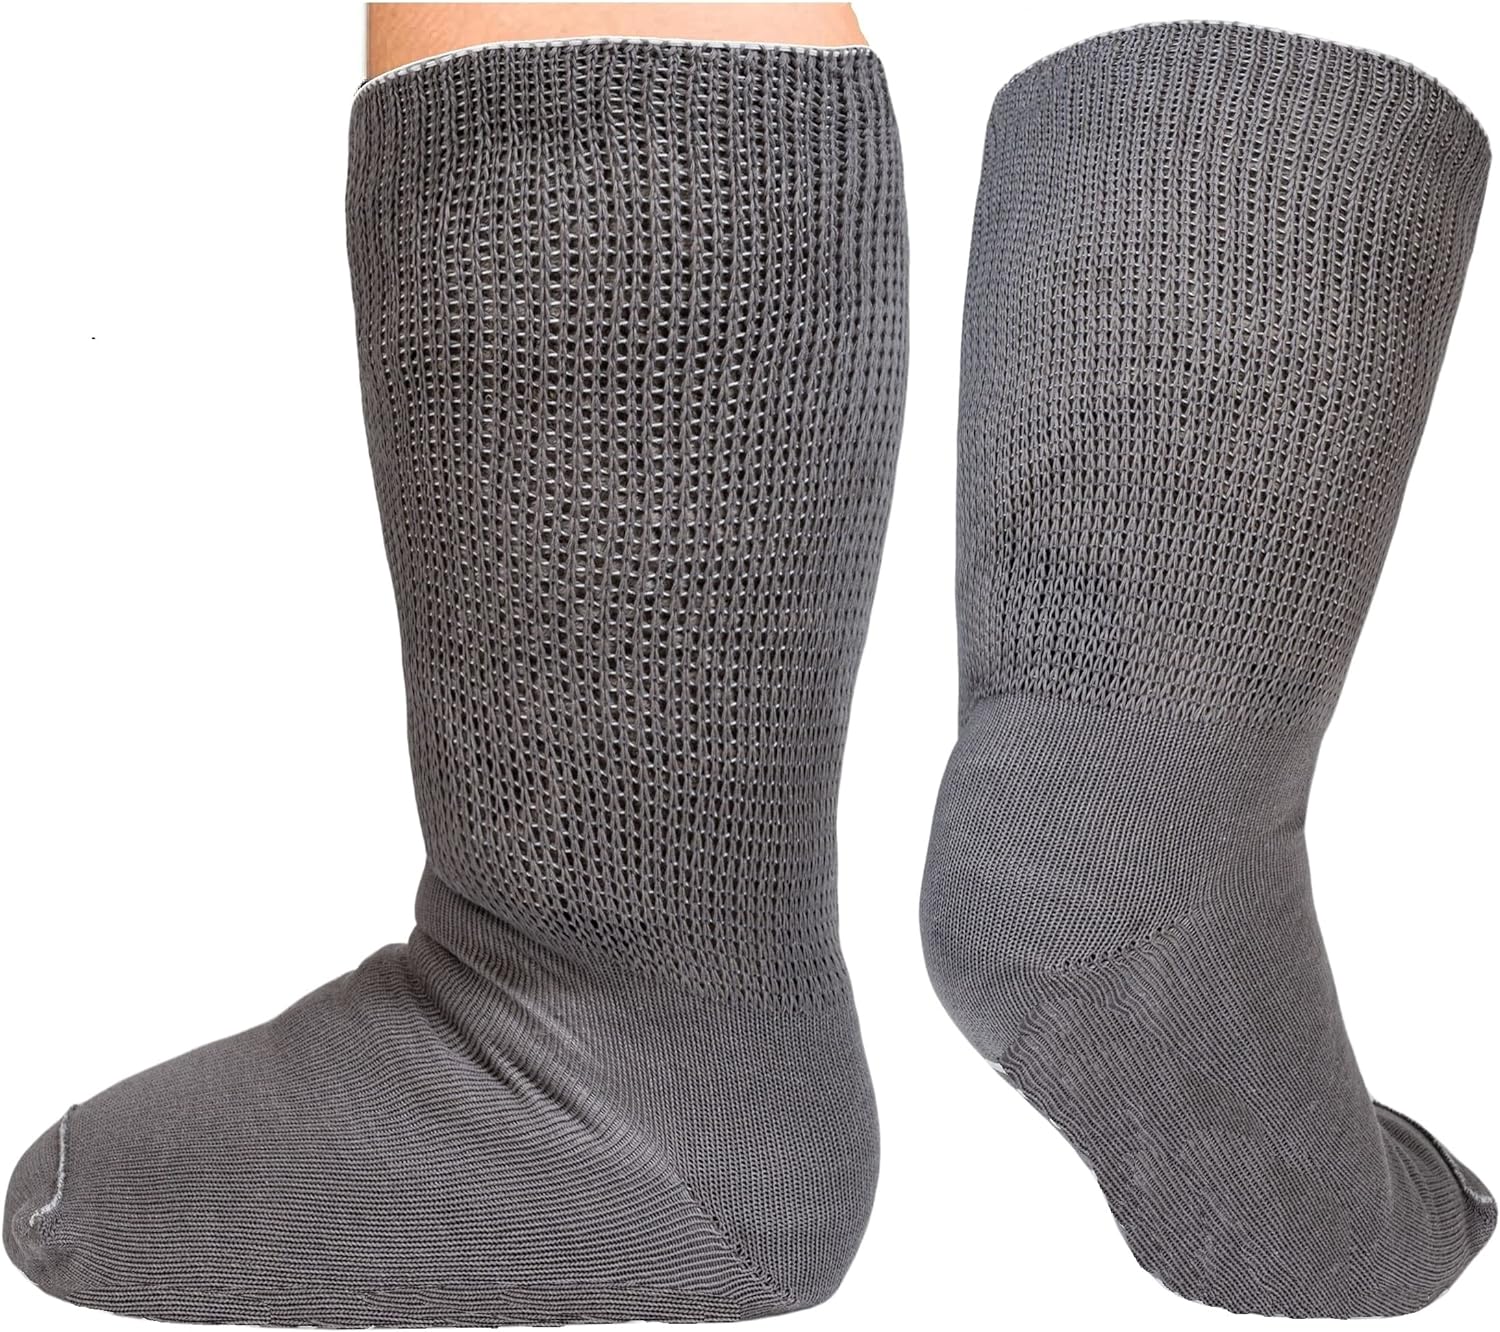 XXXL Non-Skid Bariatric Extra Wide Slipper Socks for People with Swollen feet Diabetes & Edema Black Pack of 3 Pairs